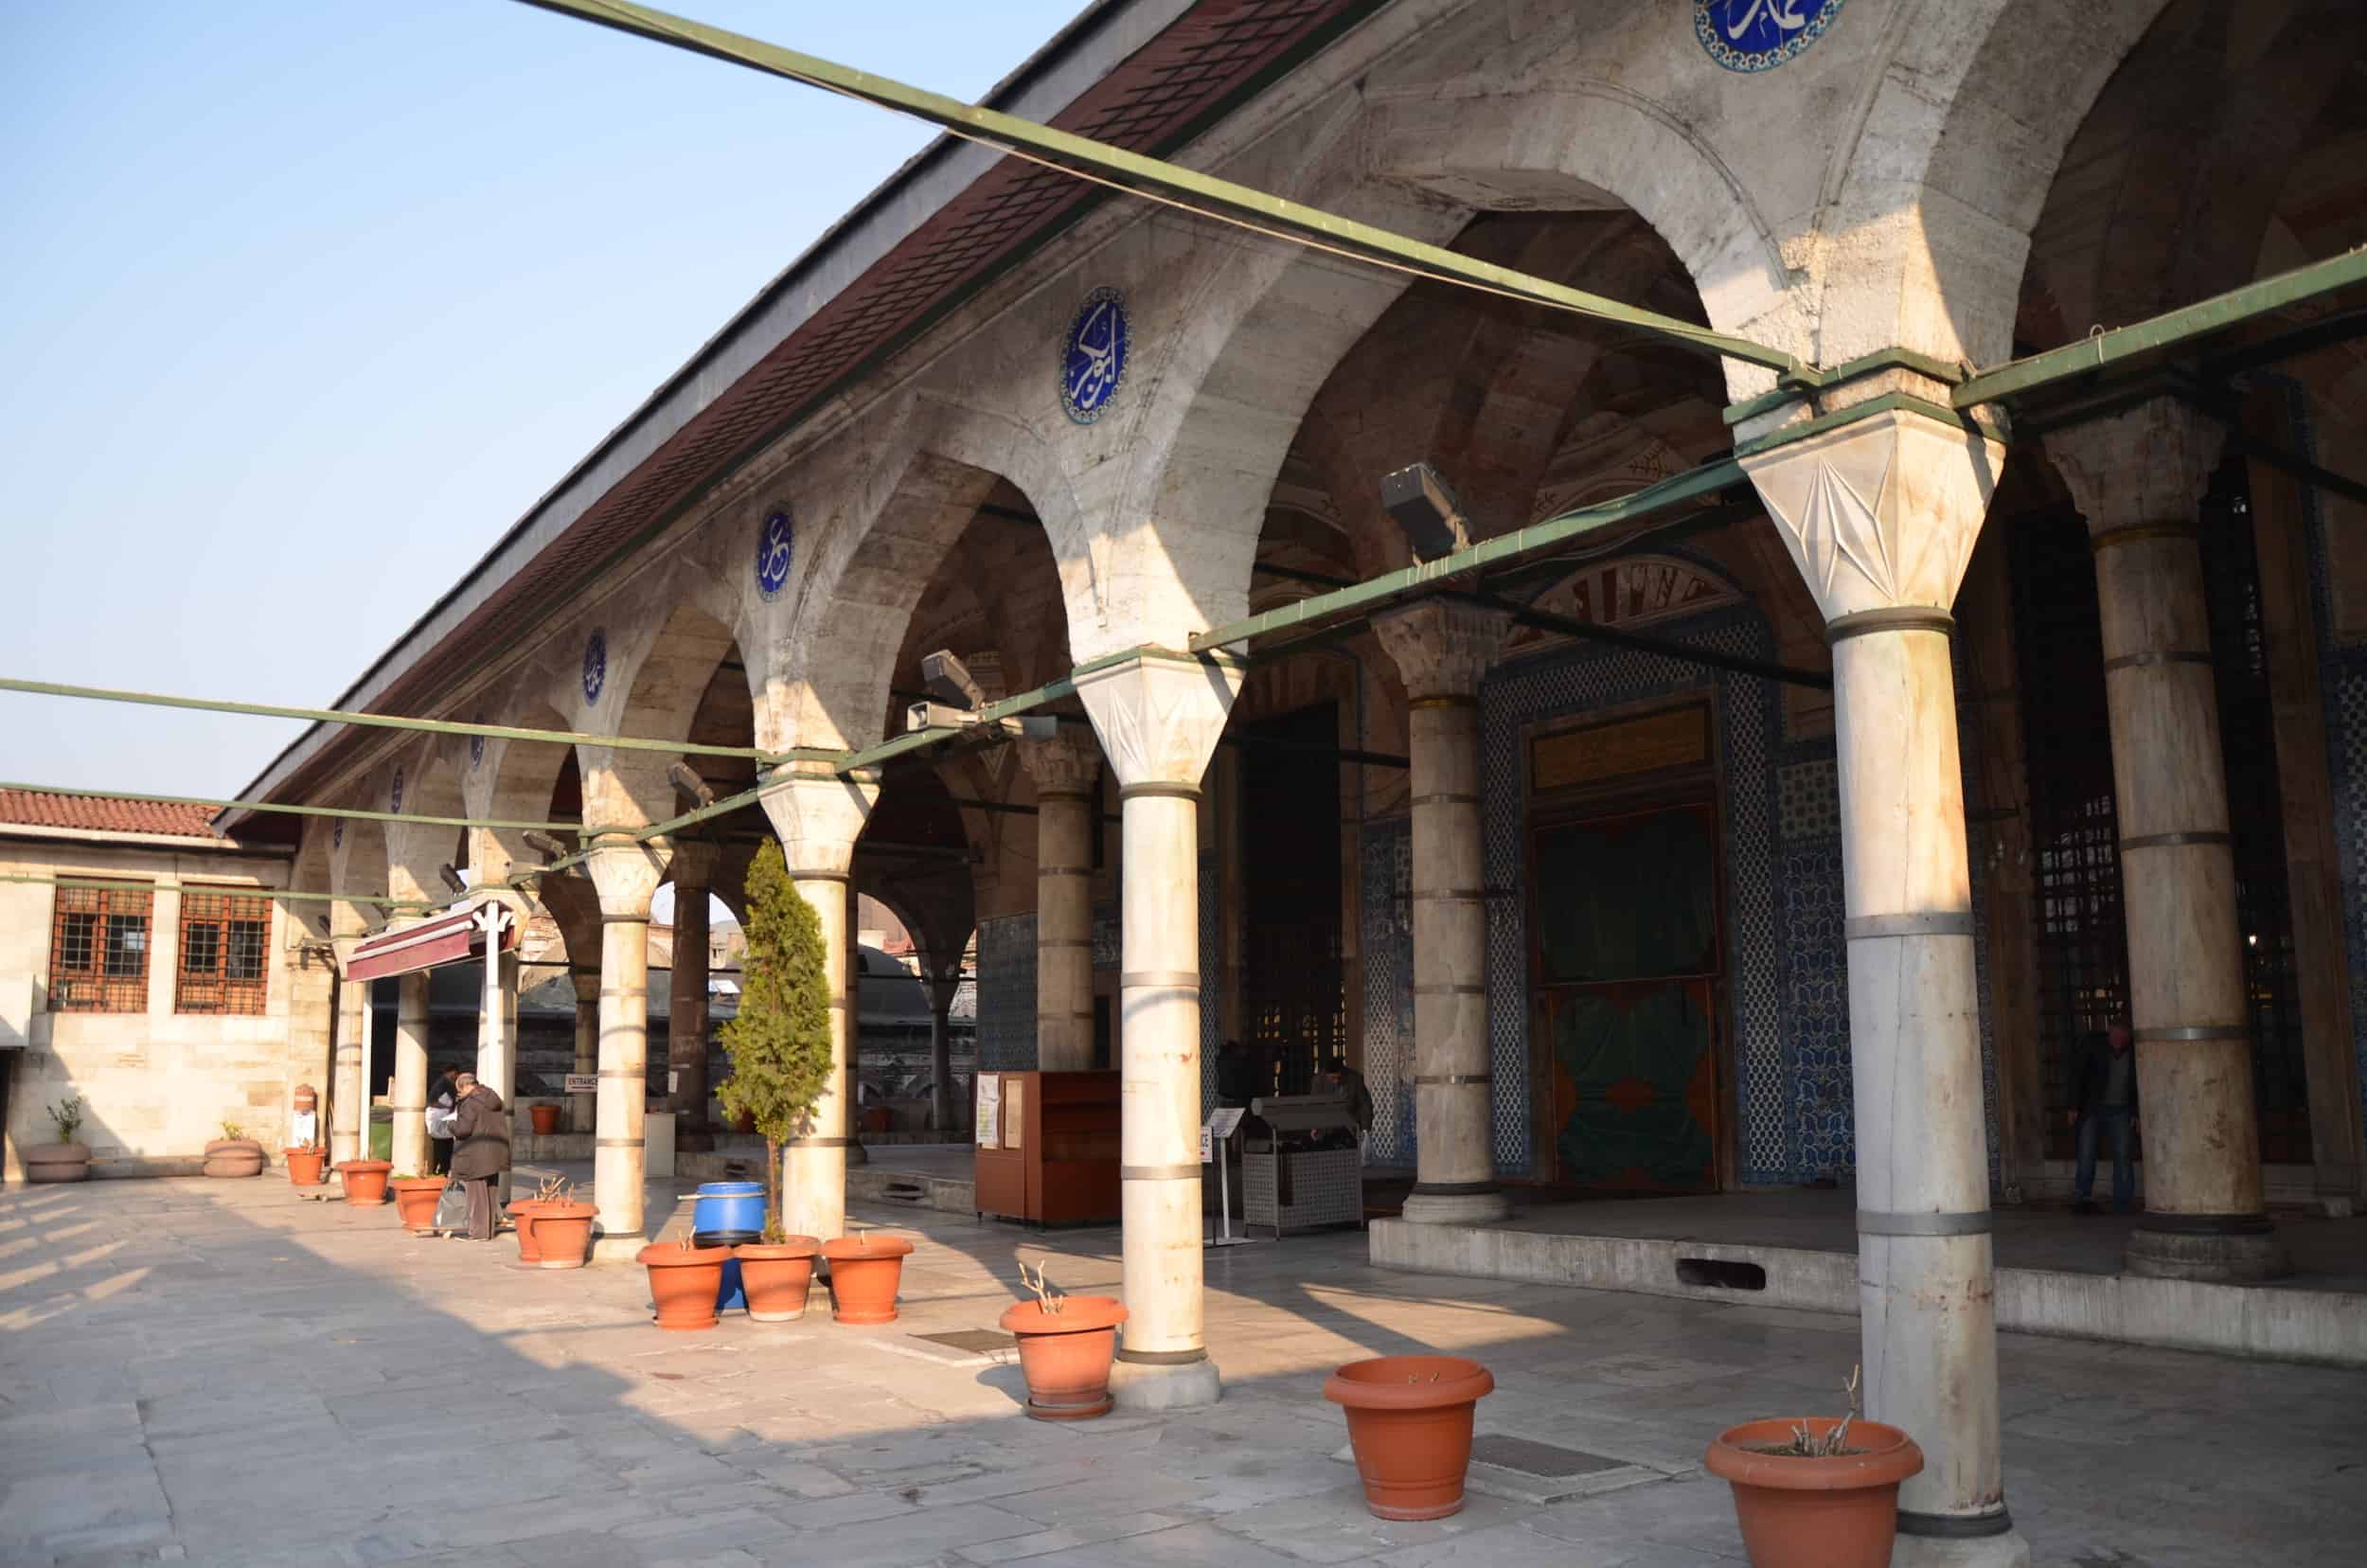 Courtyard of the Rüstem Pasha Mosque in Istanbul, Turkey